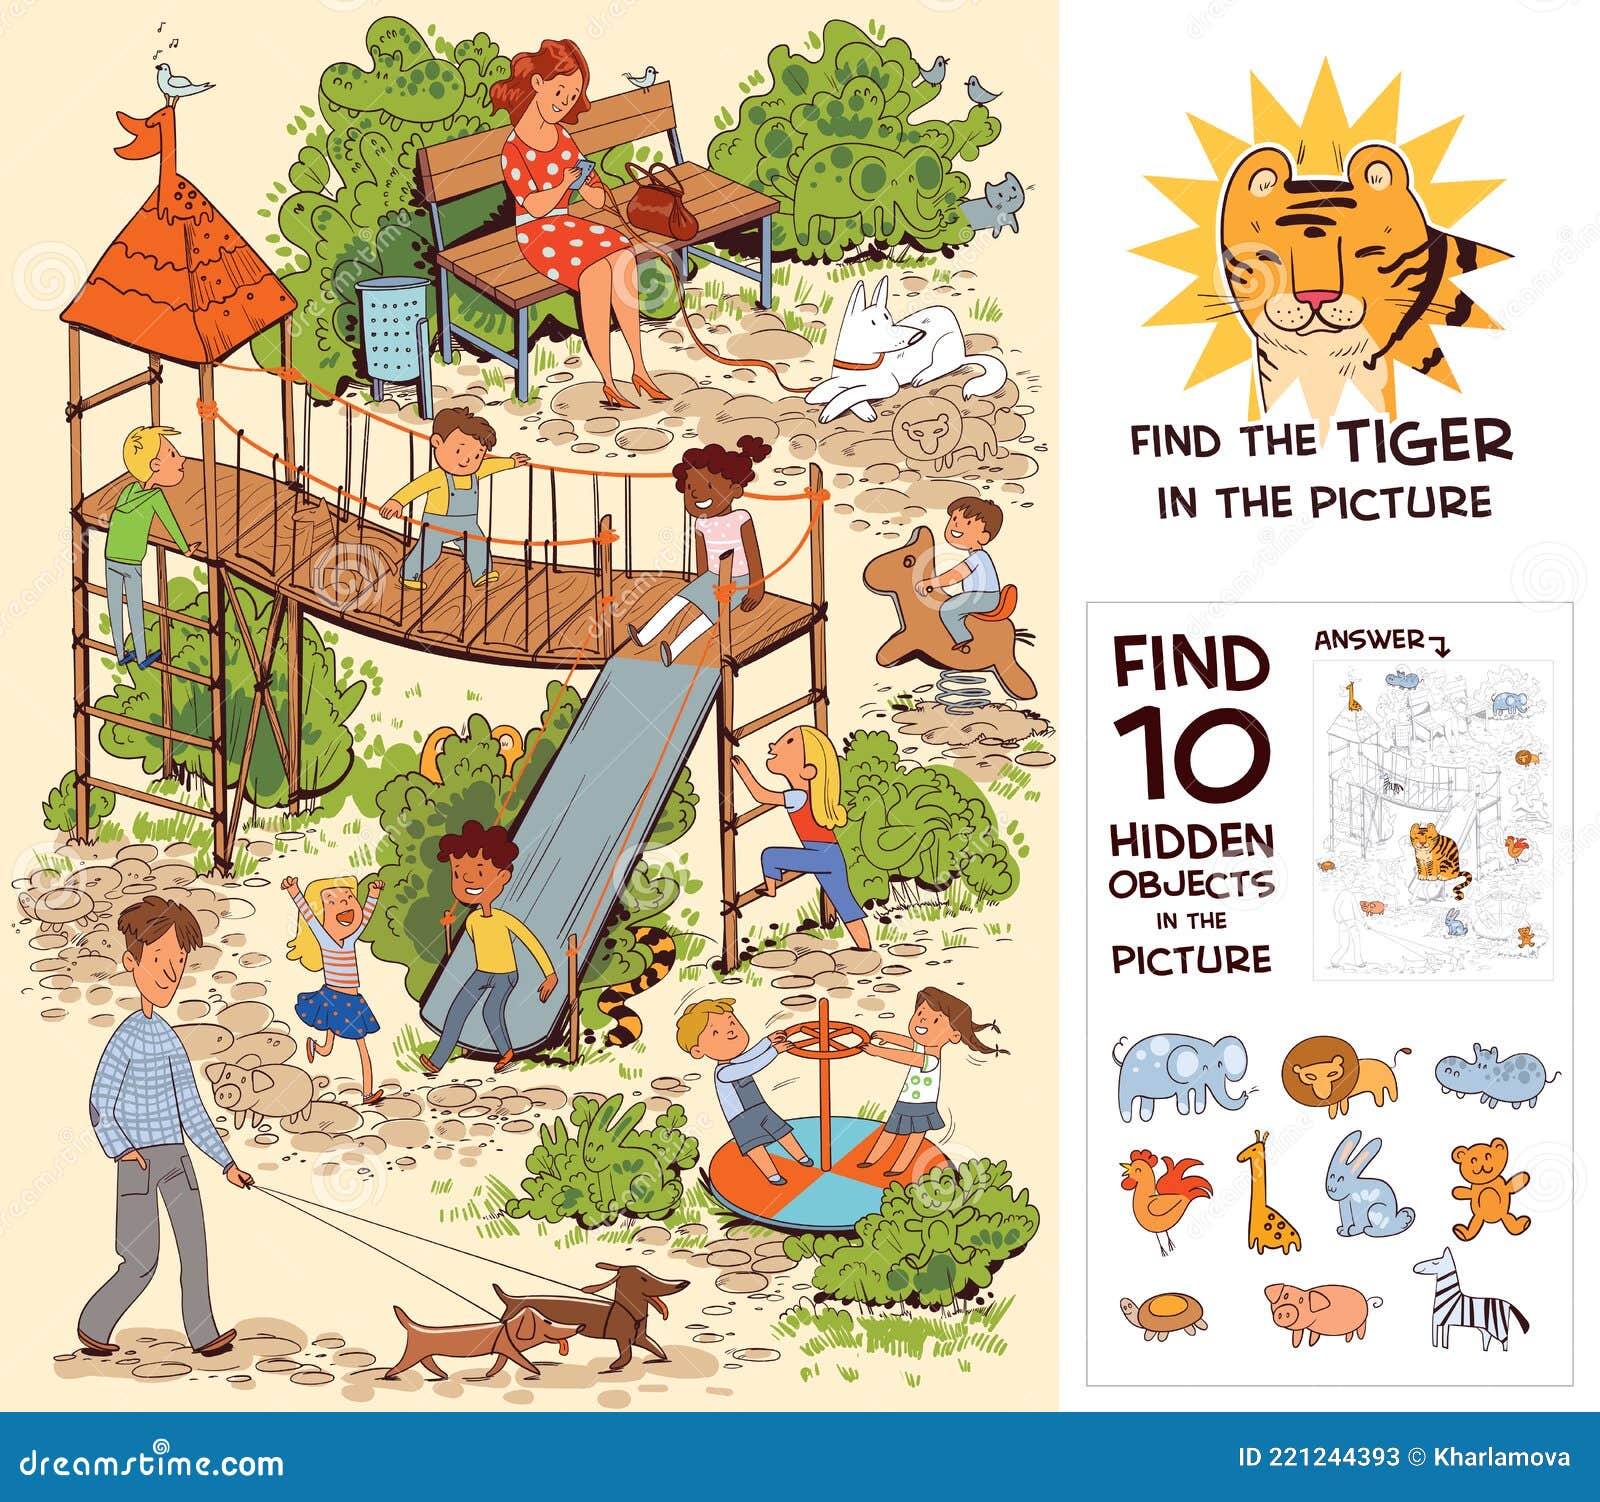 children in the playground. find 10 hidden objects in the picture